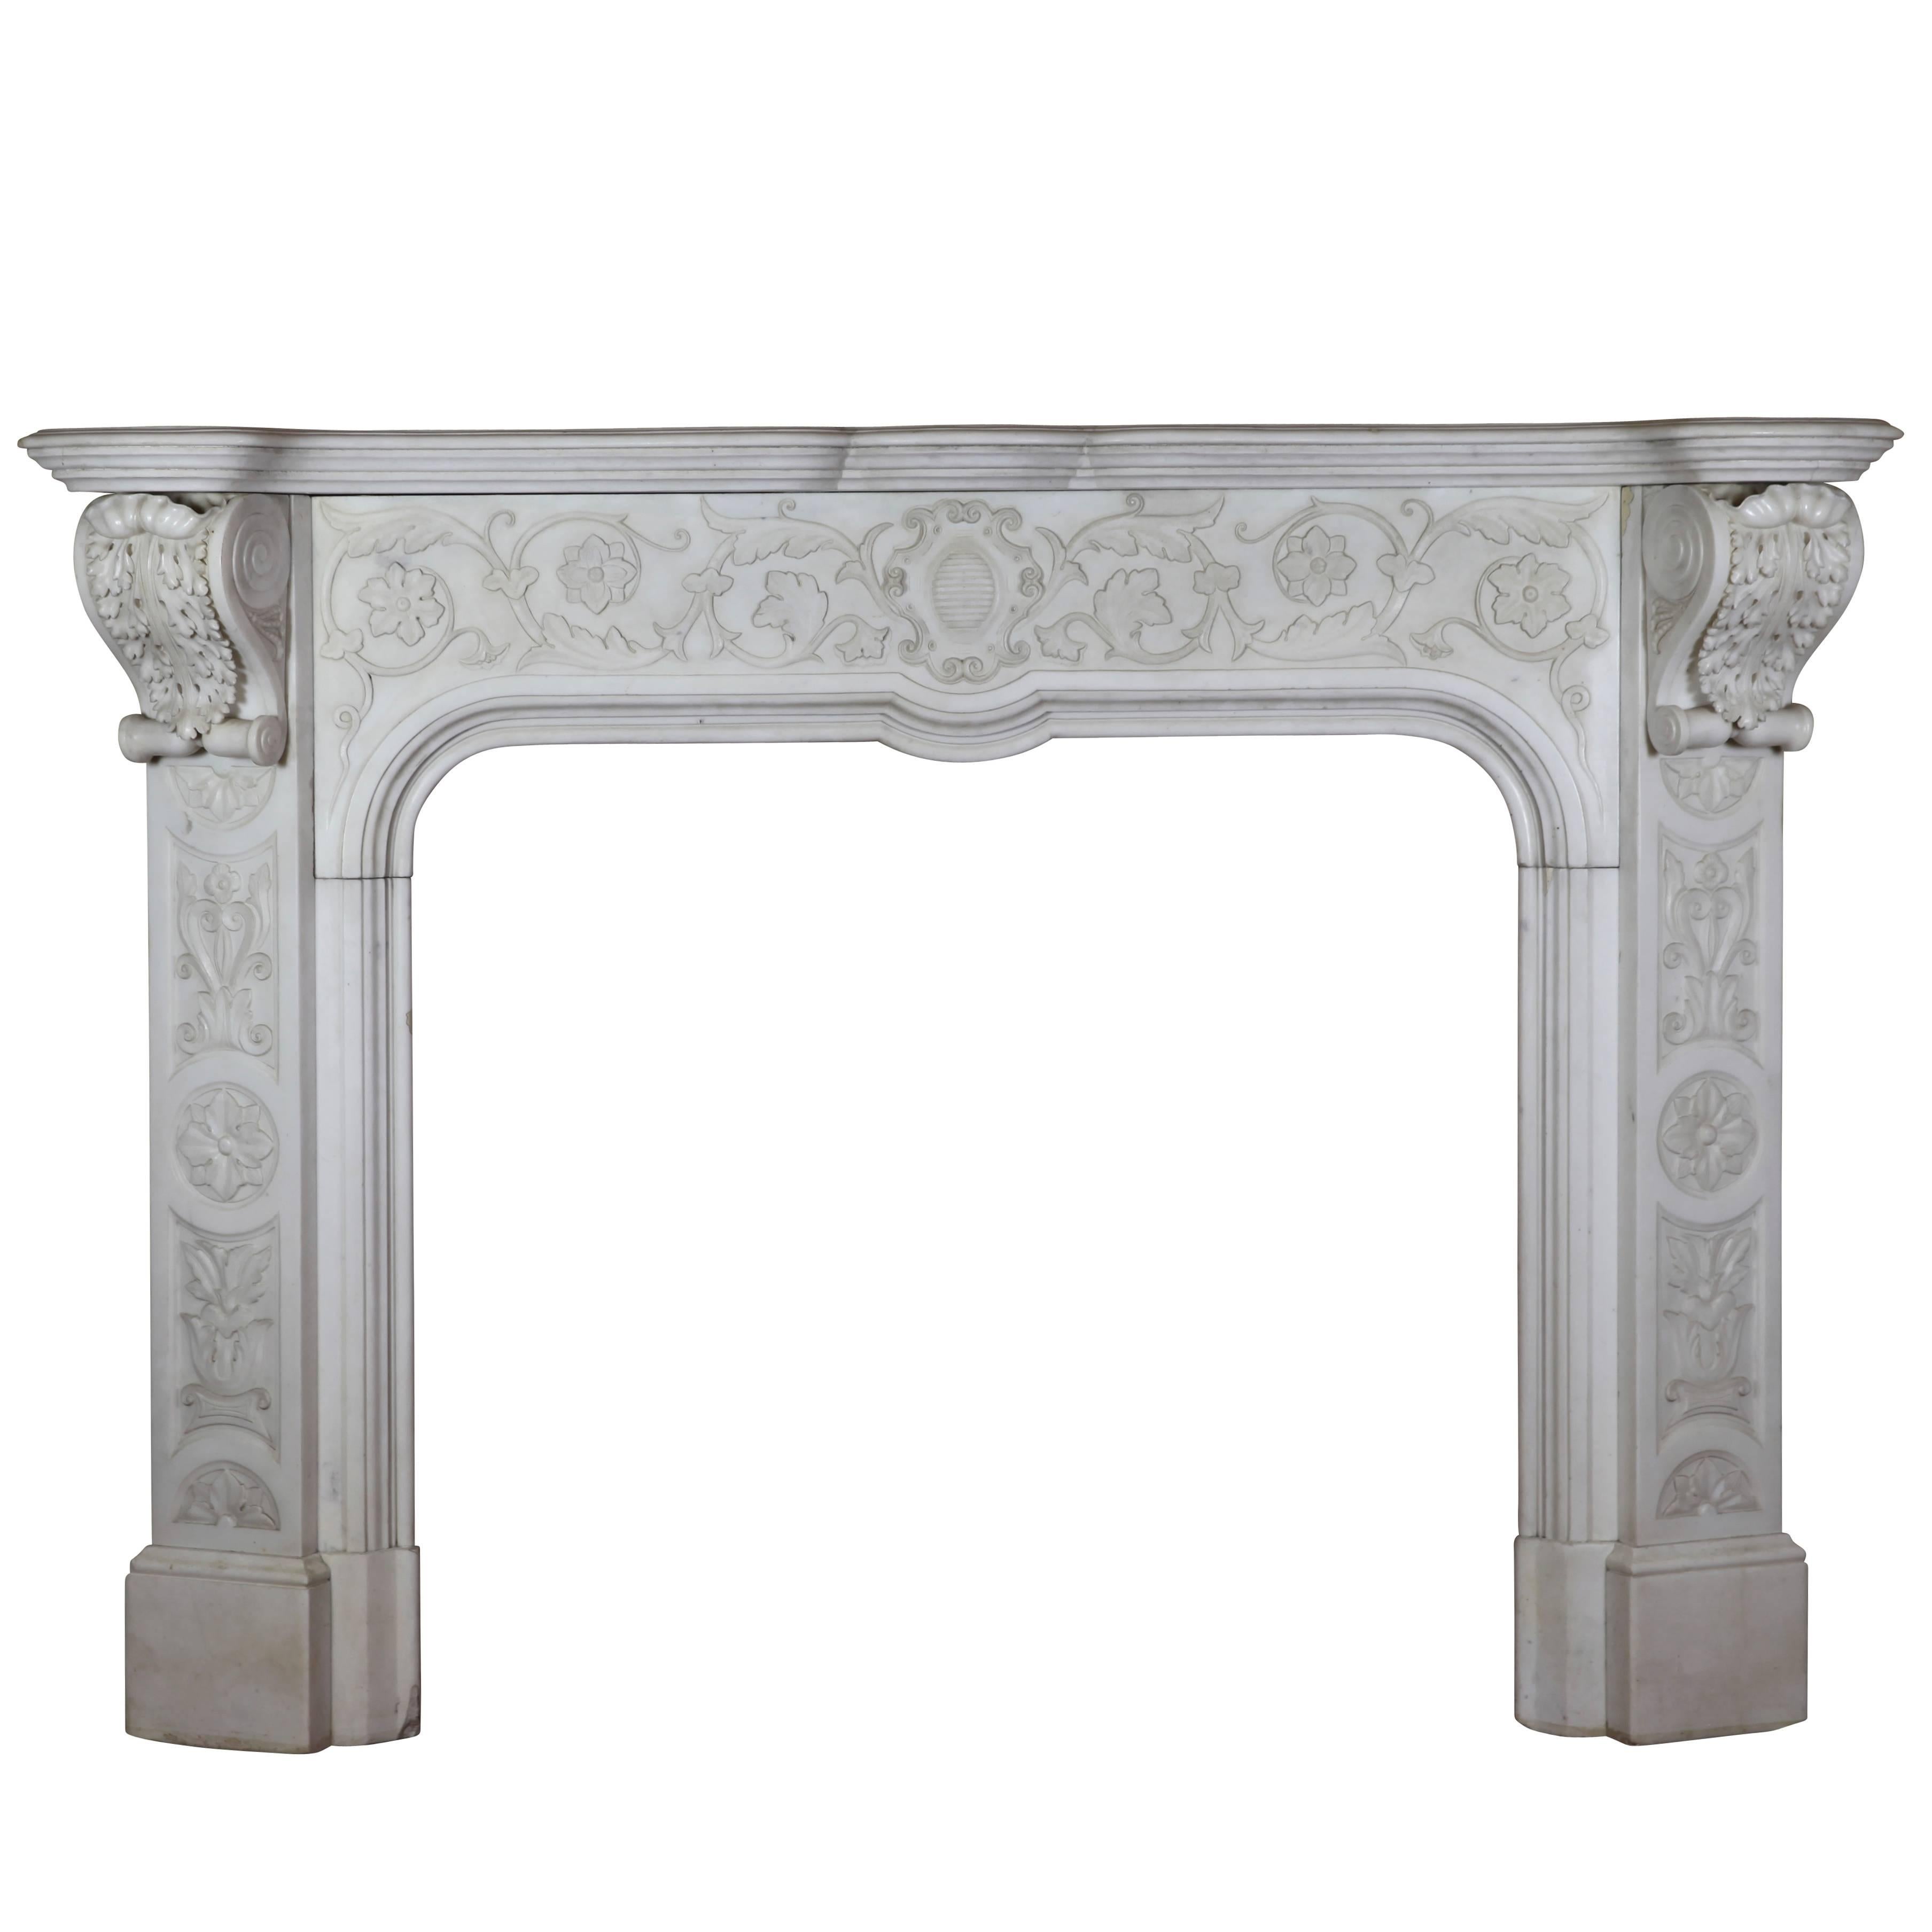 Rare 19th Century Italian White Marble Original Antique Fireplace Mantle For Sale